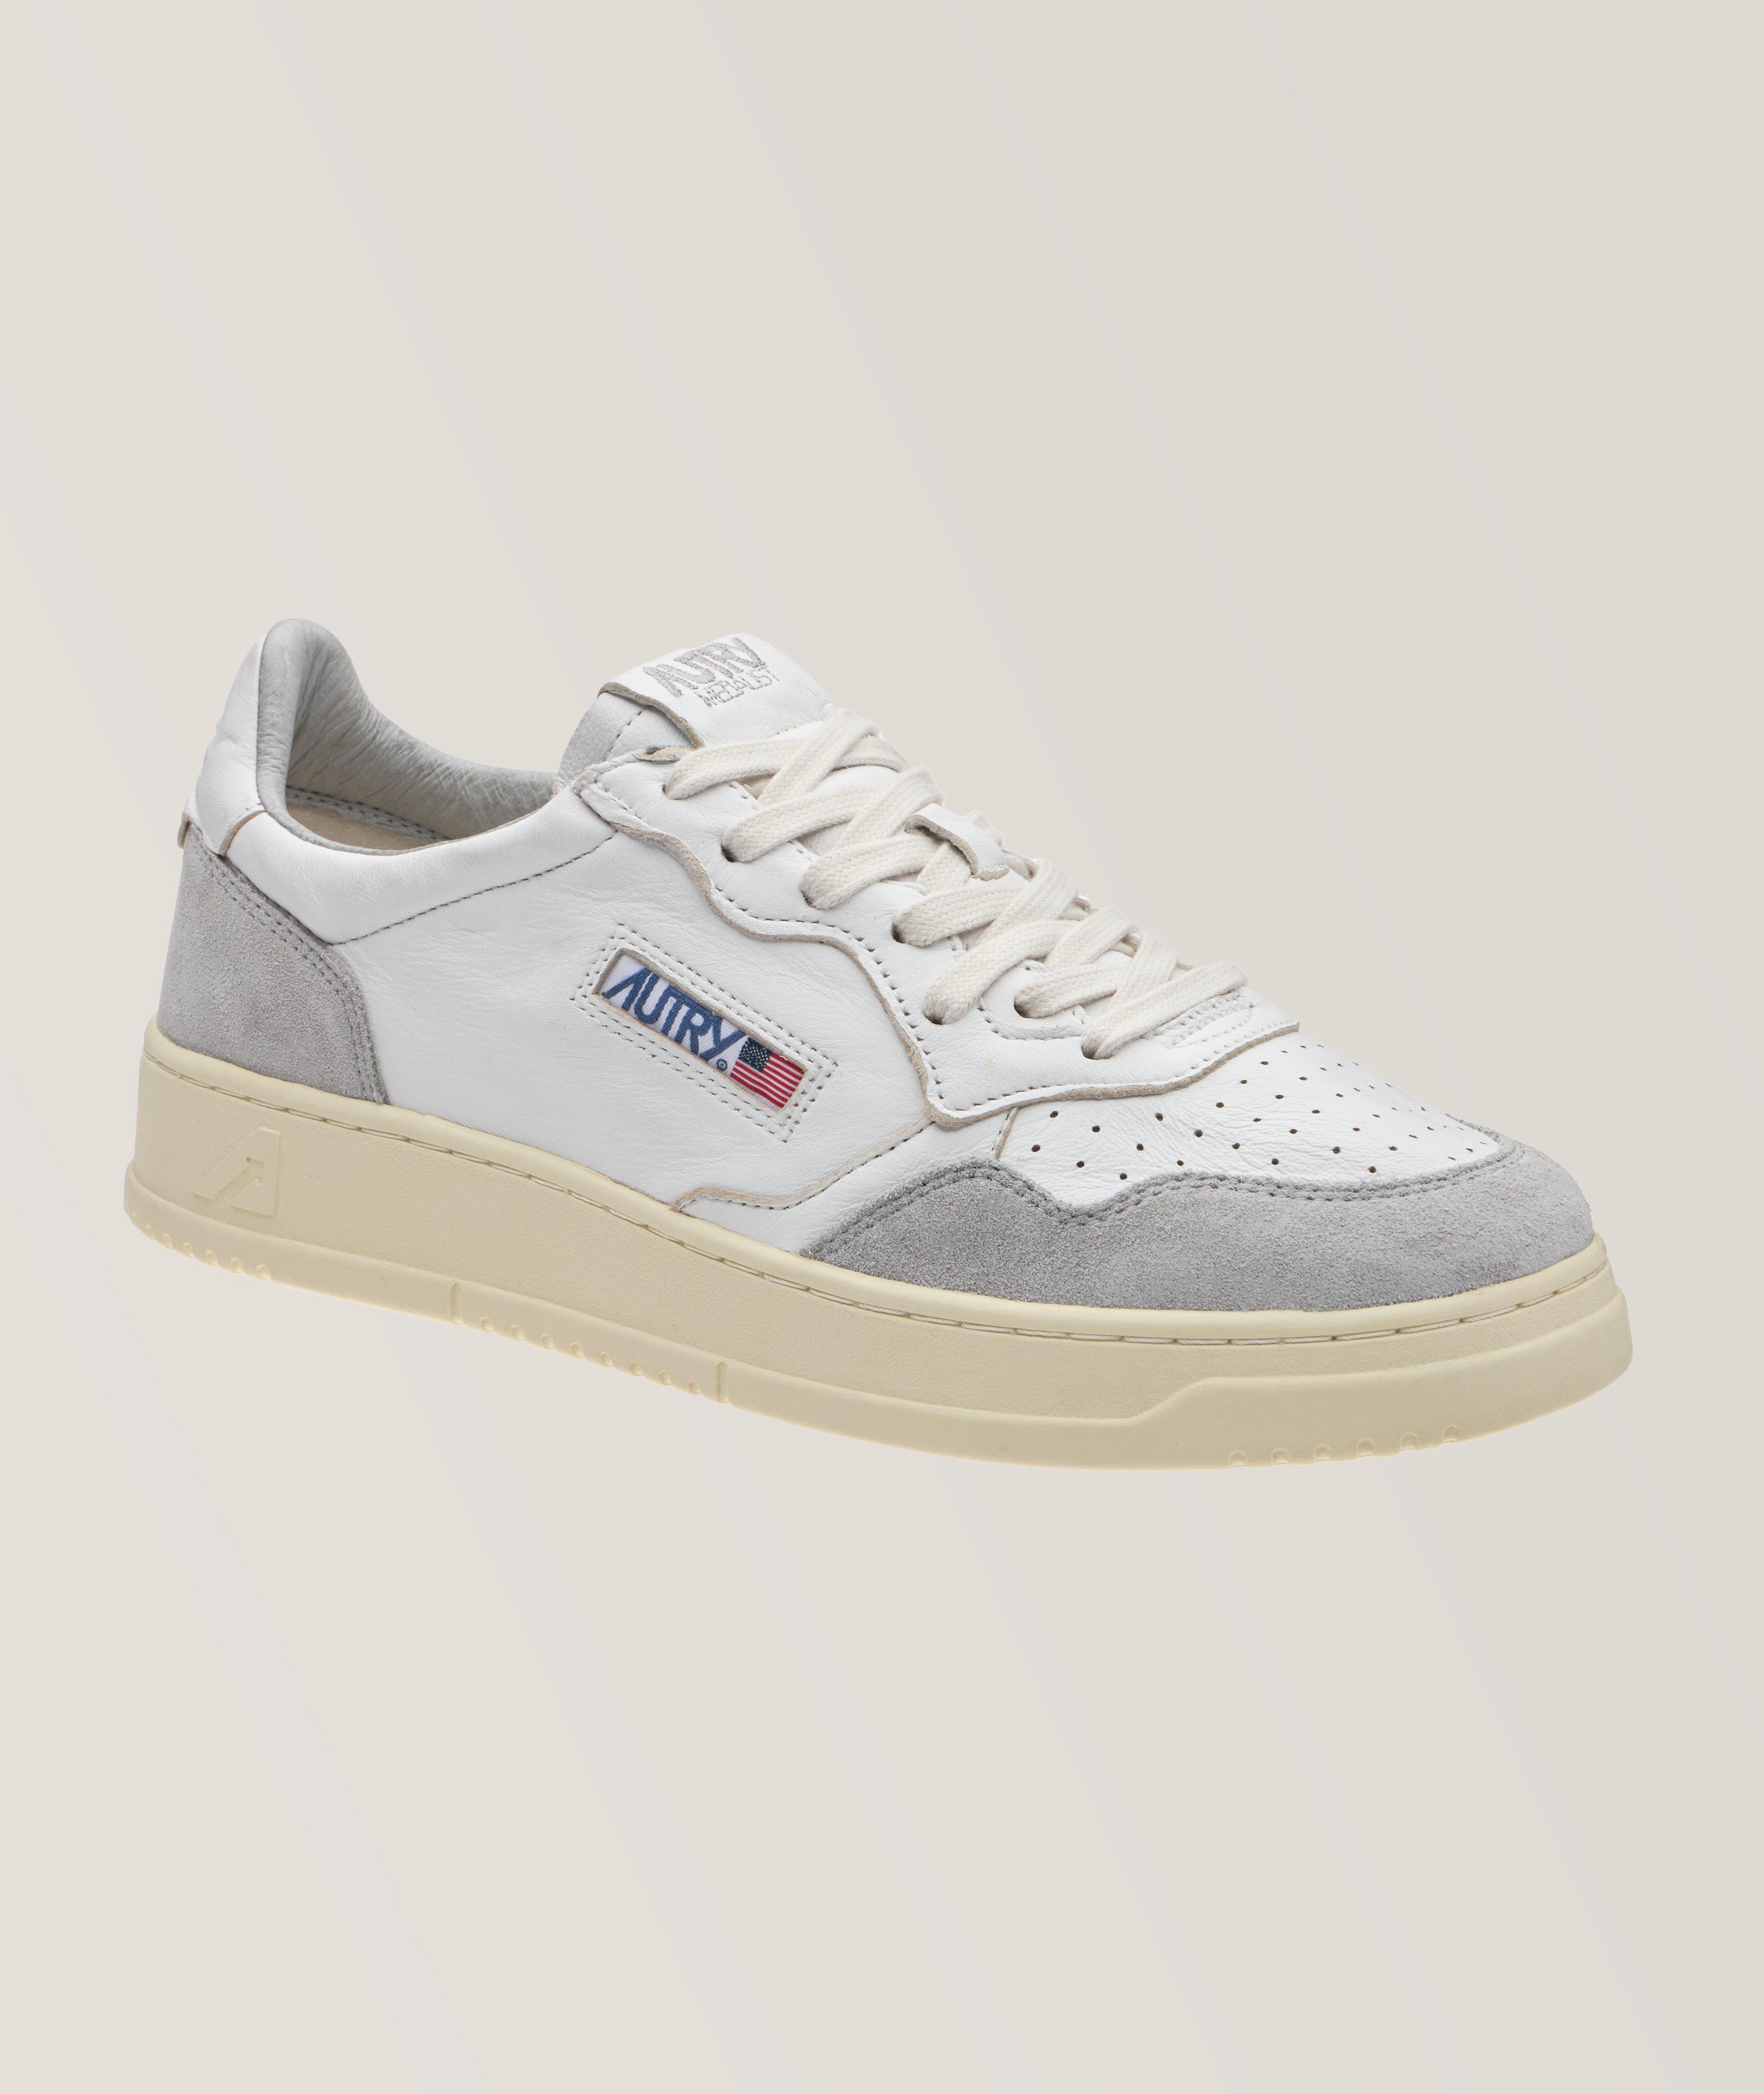 Medalist Two-Tone Washed Goatskin Sneakers image 0